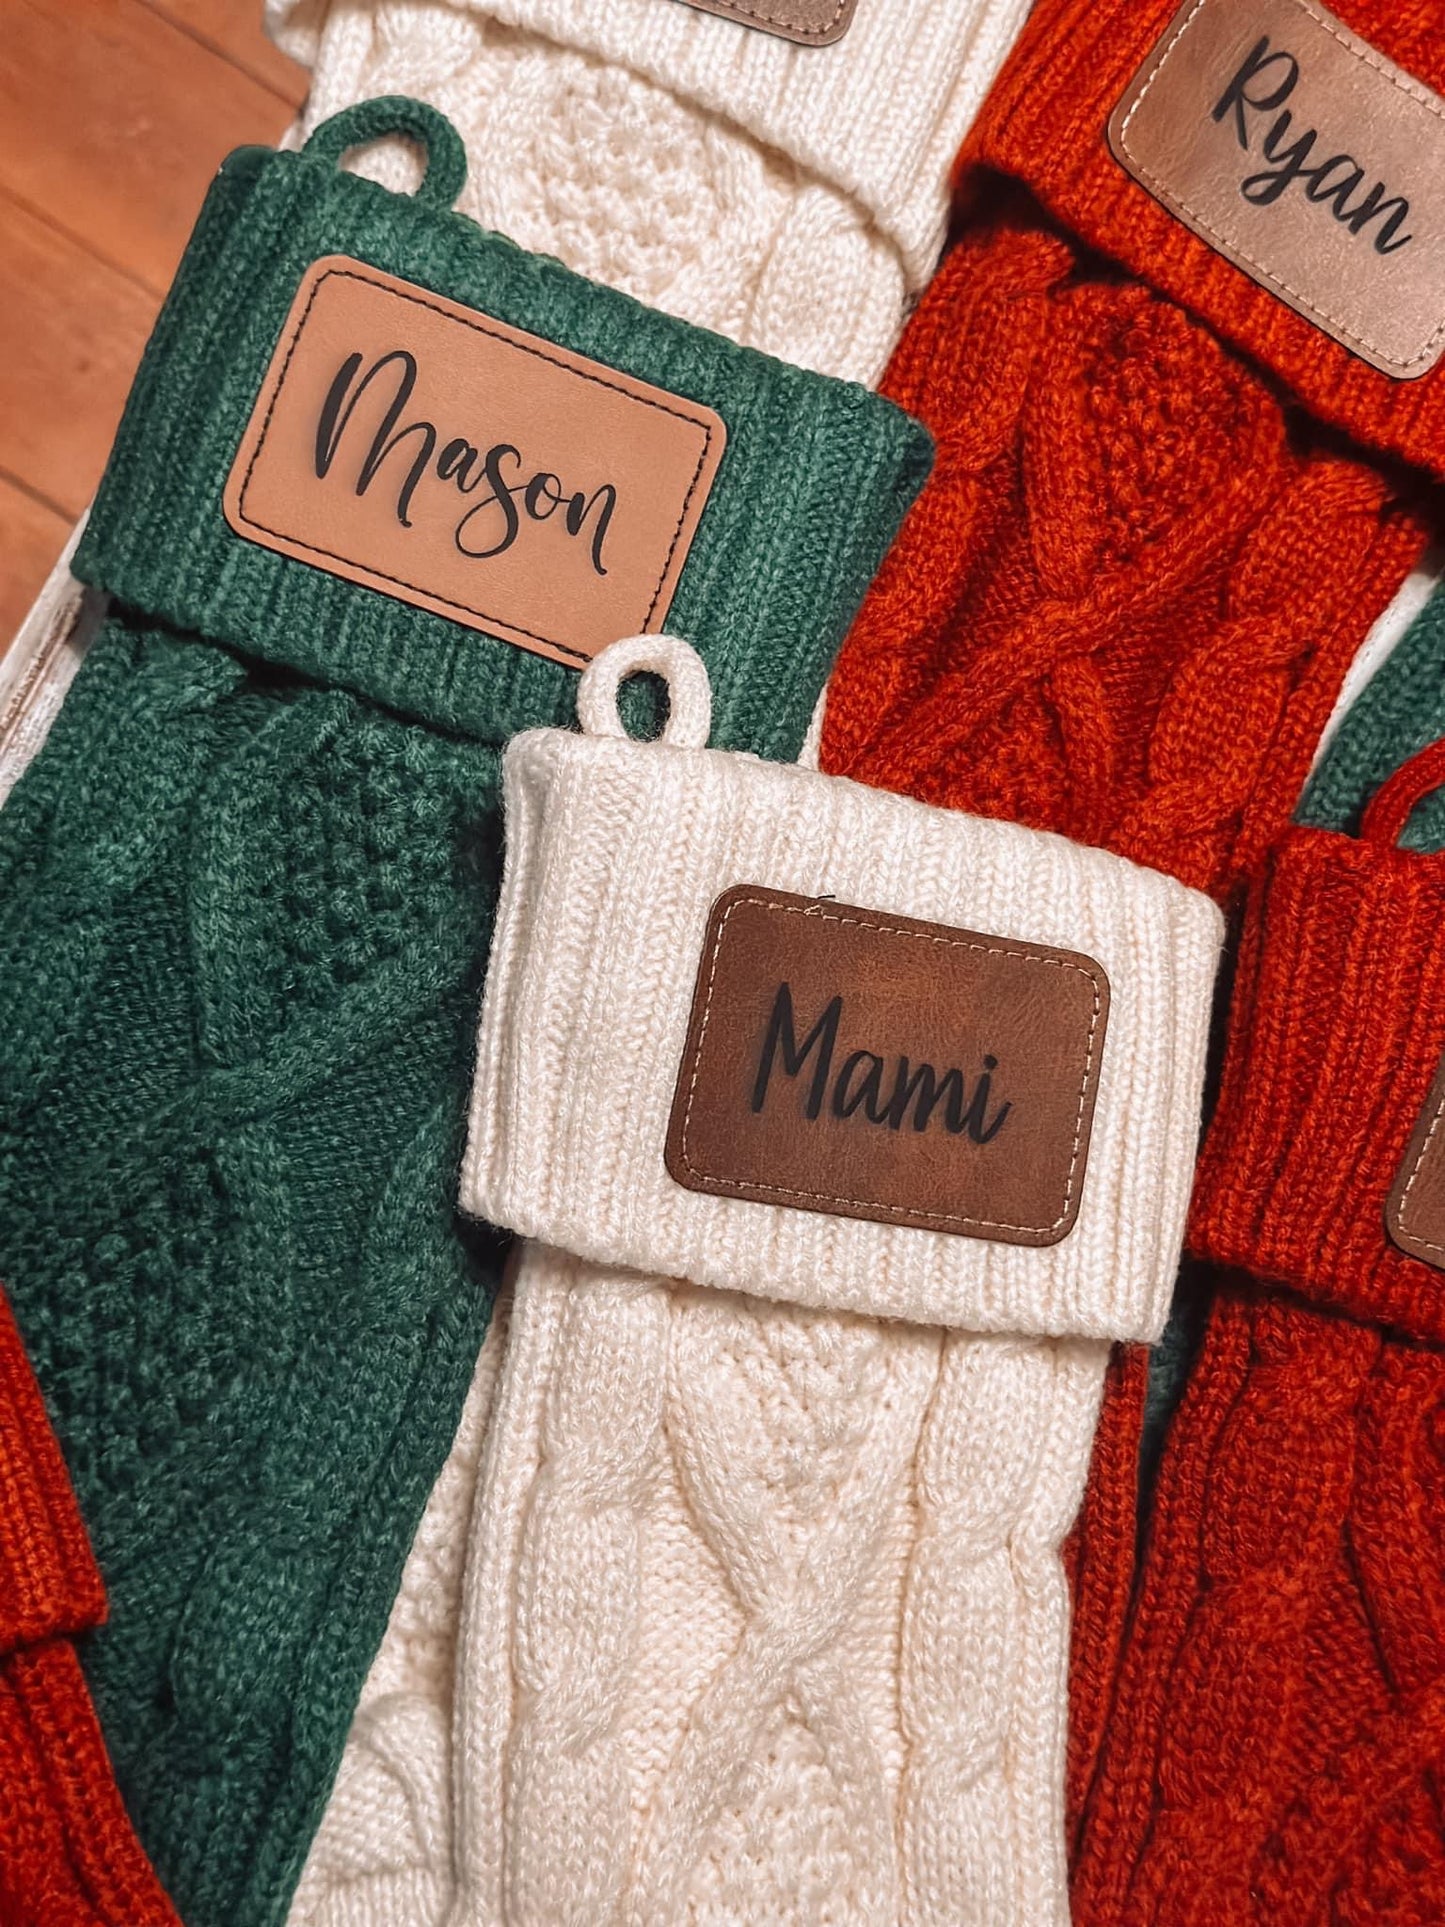 Knitted Stockings with Personalized Leather Engraved Patch